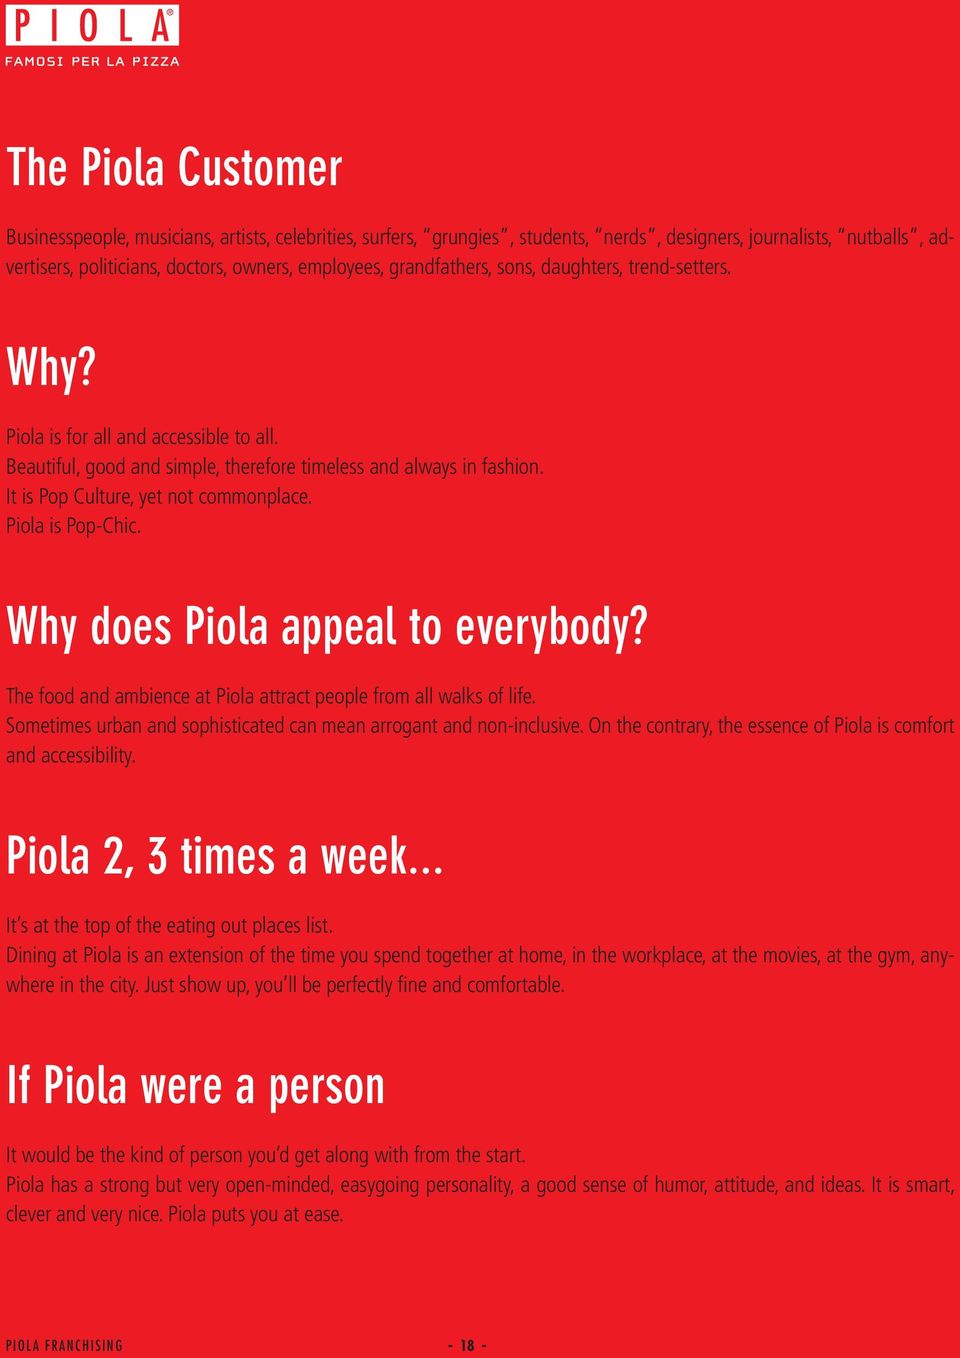 Piola is Pop-Chic. Why does Piola appeal to everybody? The food and ambience at Piola attract people from all walks of life. Sometimes urban and sophisticated can mean arrogant and non-inclusive.